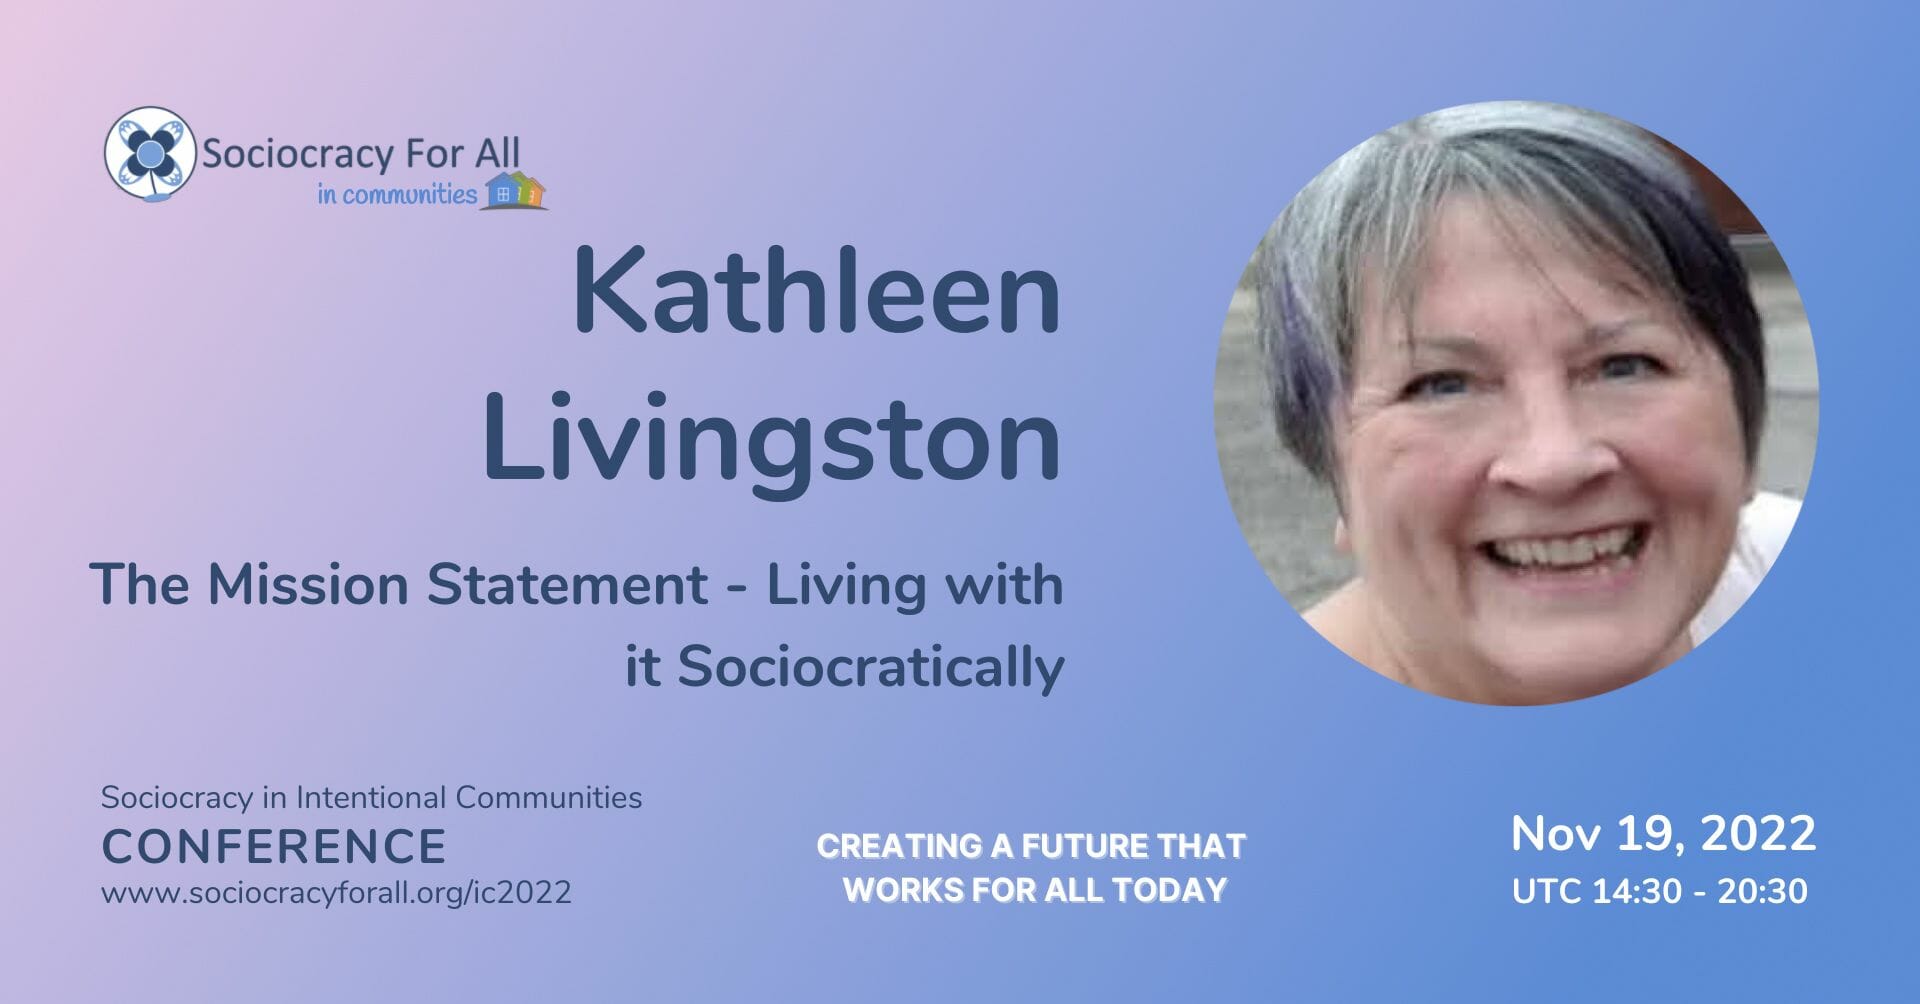 kathleen livingston sociocracy in intentional communities conference 2022 - - Sociocracy For All